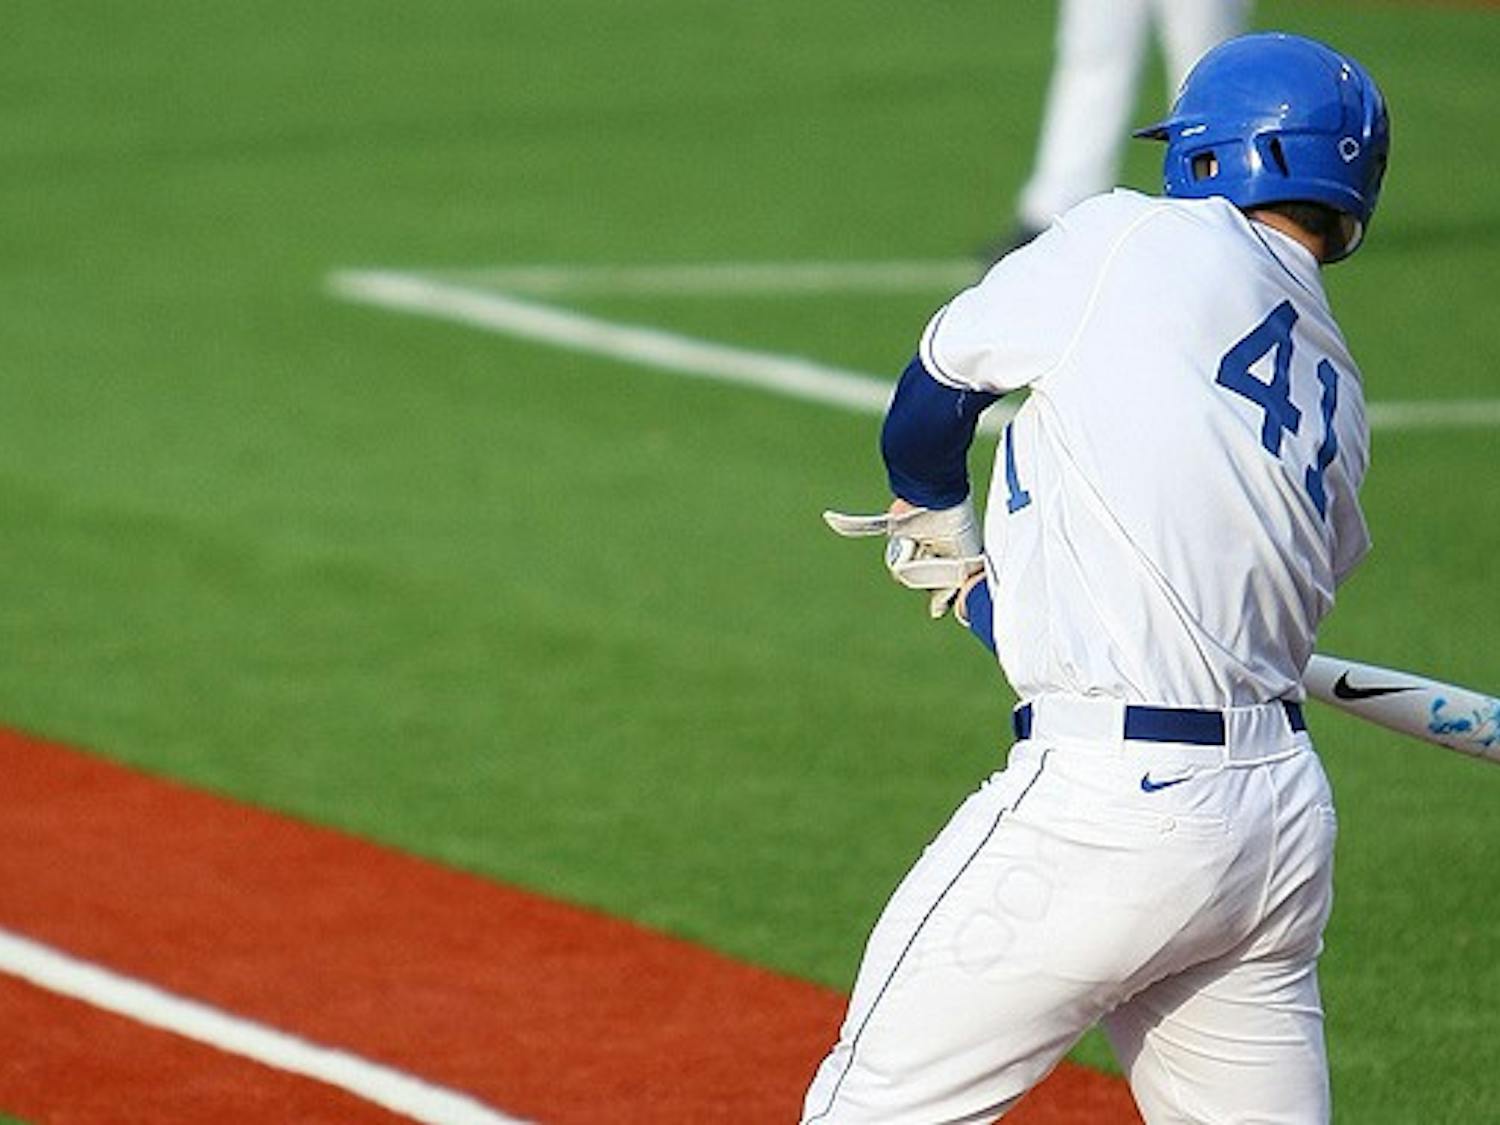 Similar to wooden bats, the new bats in college baseball have resulted in lower power numbers for Duke.